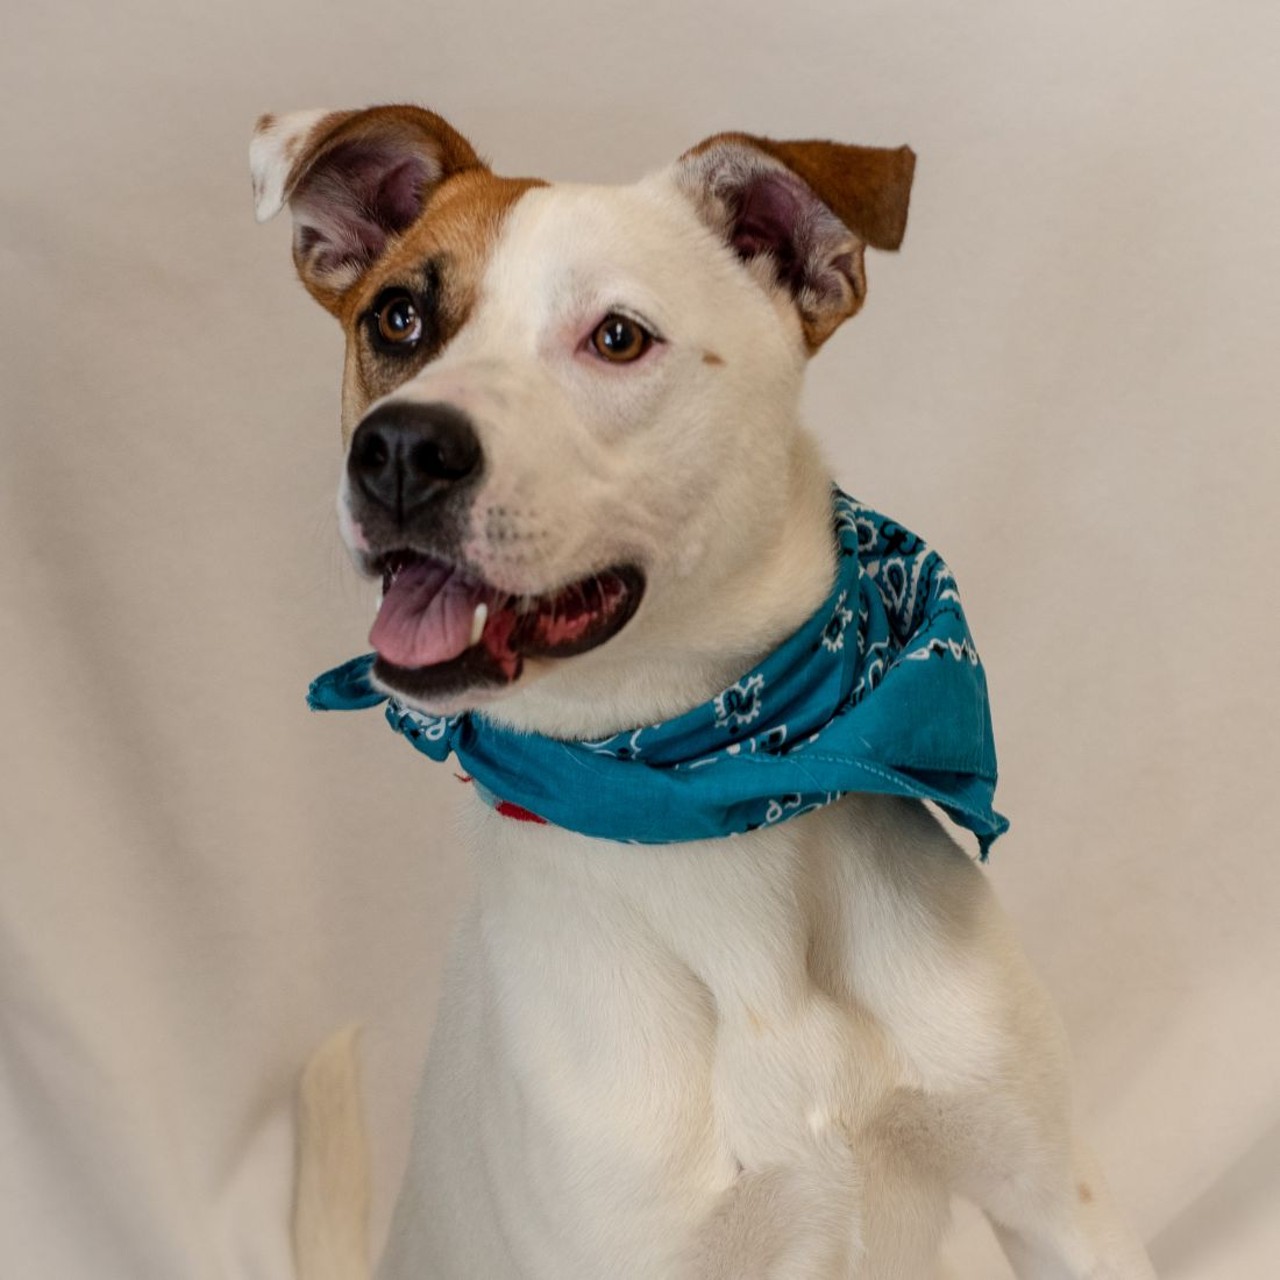 NAME:  Ezra 
GENDER: Male
BREED: Shepherd
AGE: 1 year
WEIGHT: 43 pounds
SPECIAL CONSIDERATIONS: Prefers an active owner with older or no children
REASON I CAME TO MHS: Agency transfer
LOCATION: Mackey Center for Animal Care in Detroit
ID NUMBER: 867632